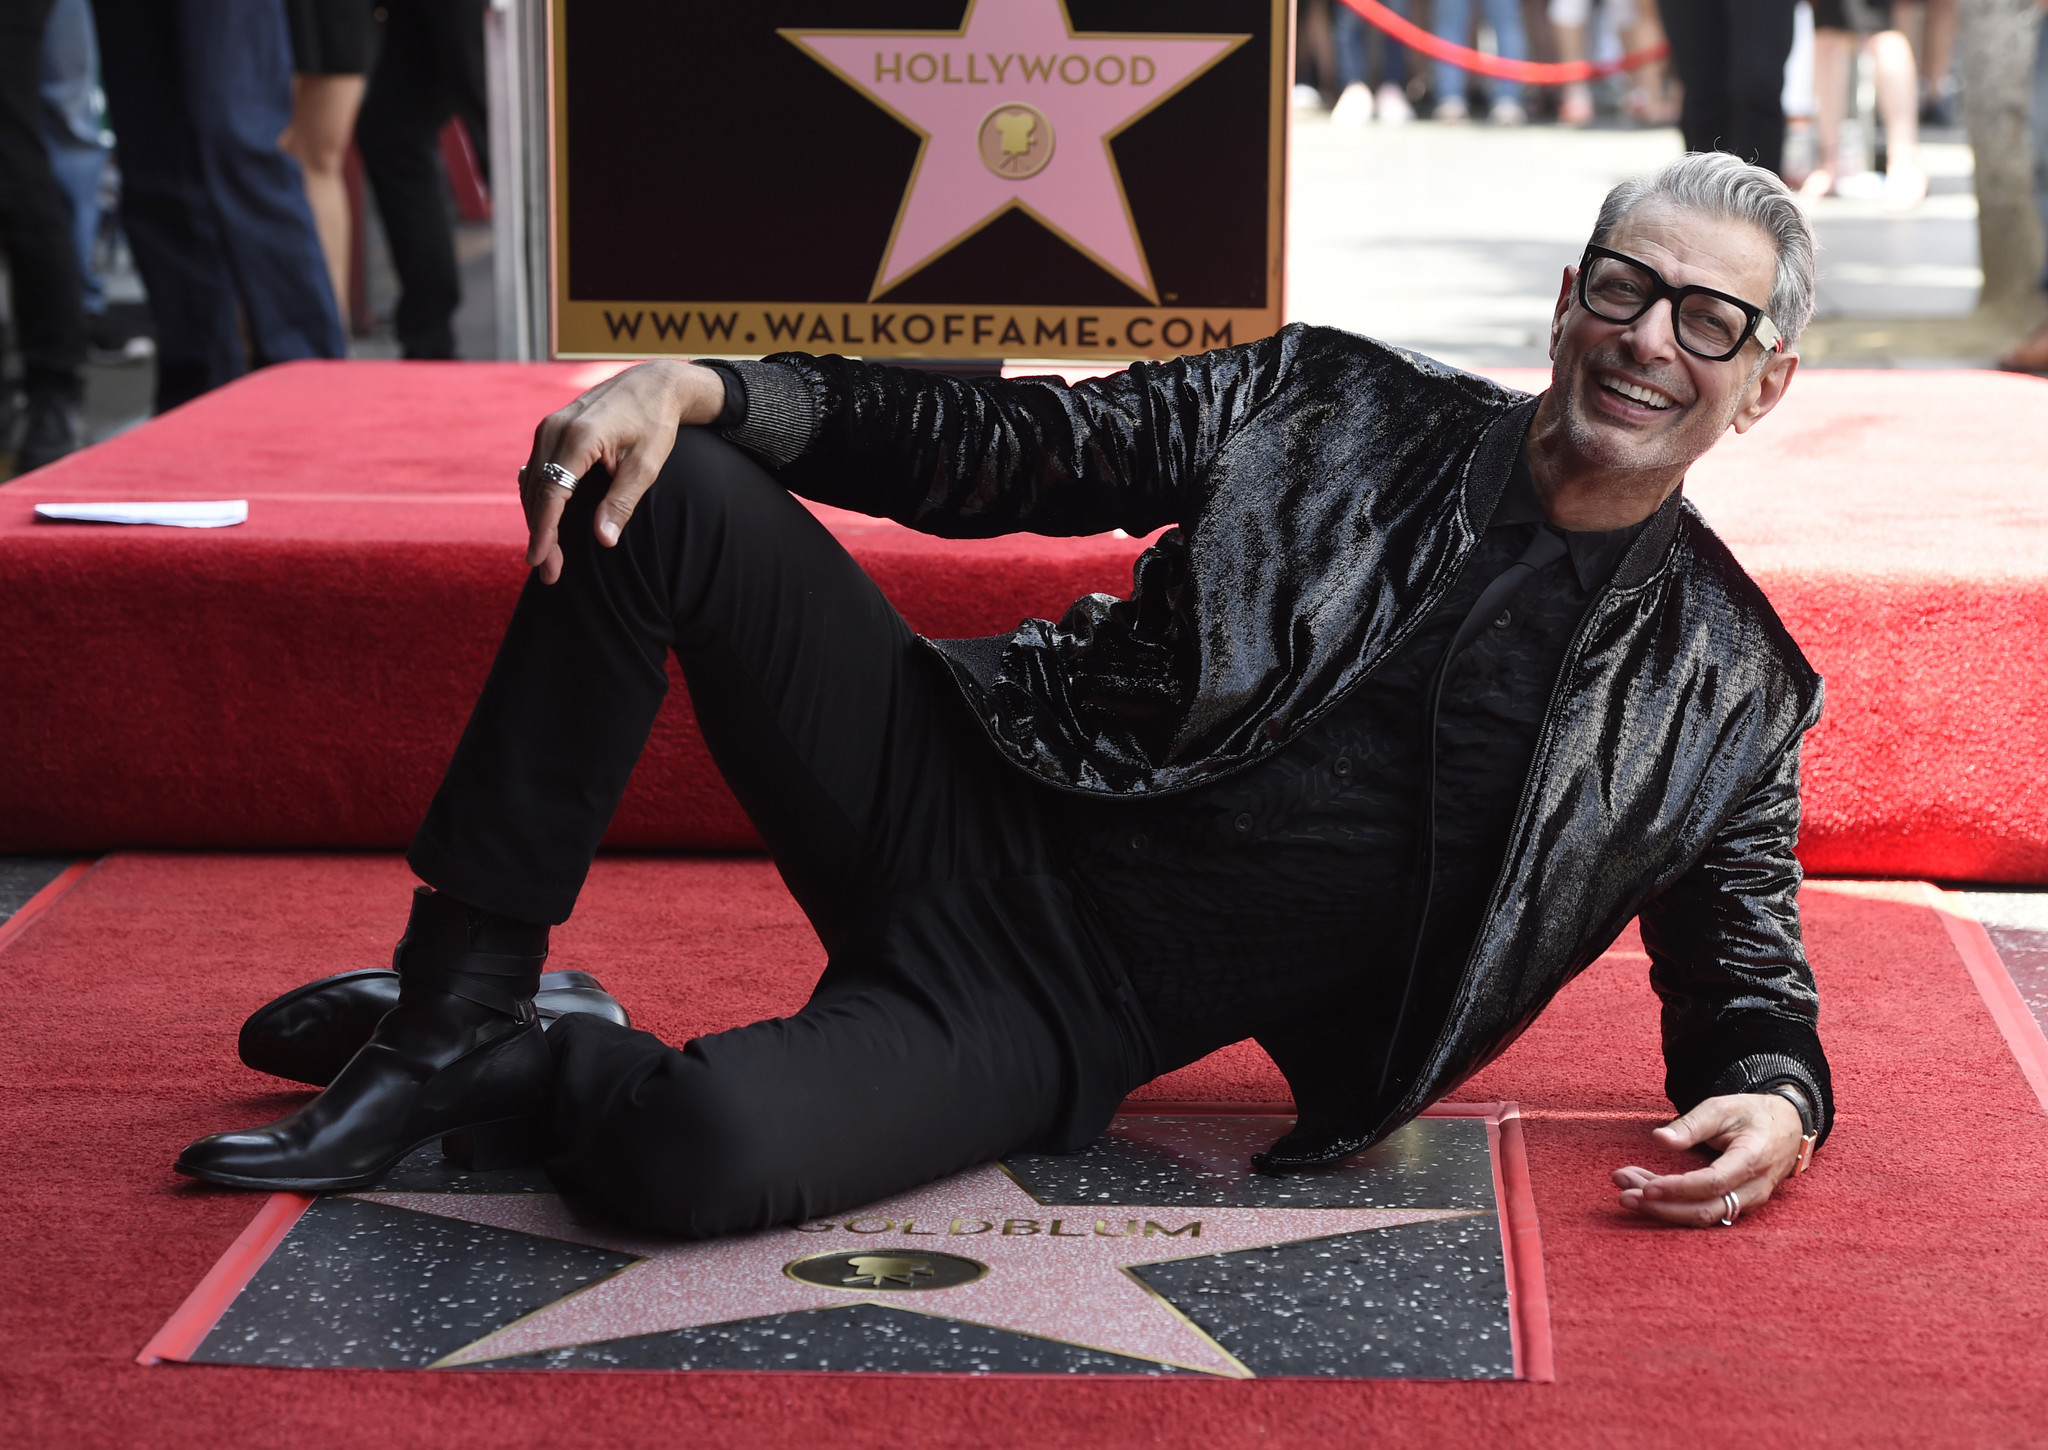 Goldblum was beaming as he struck a pose in front of his star during the ceremony.